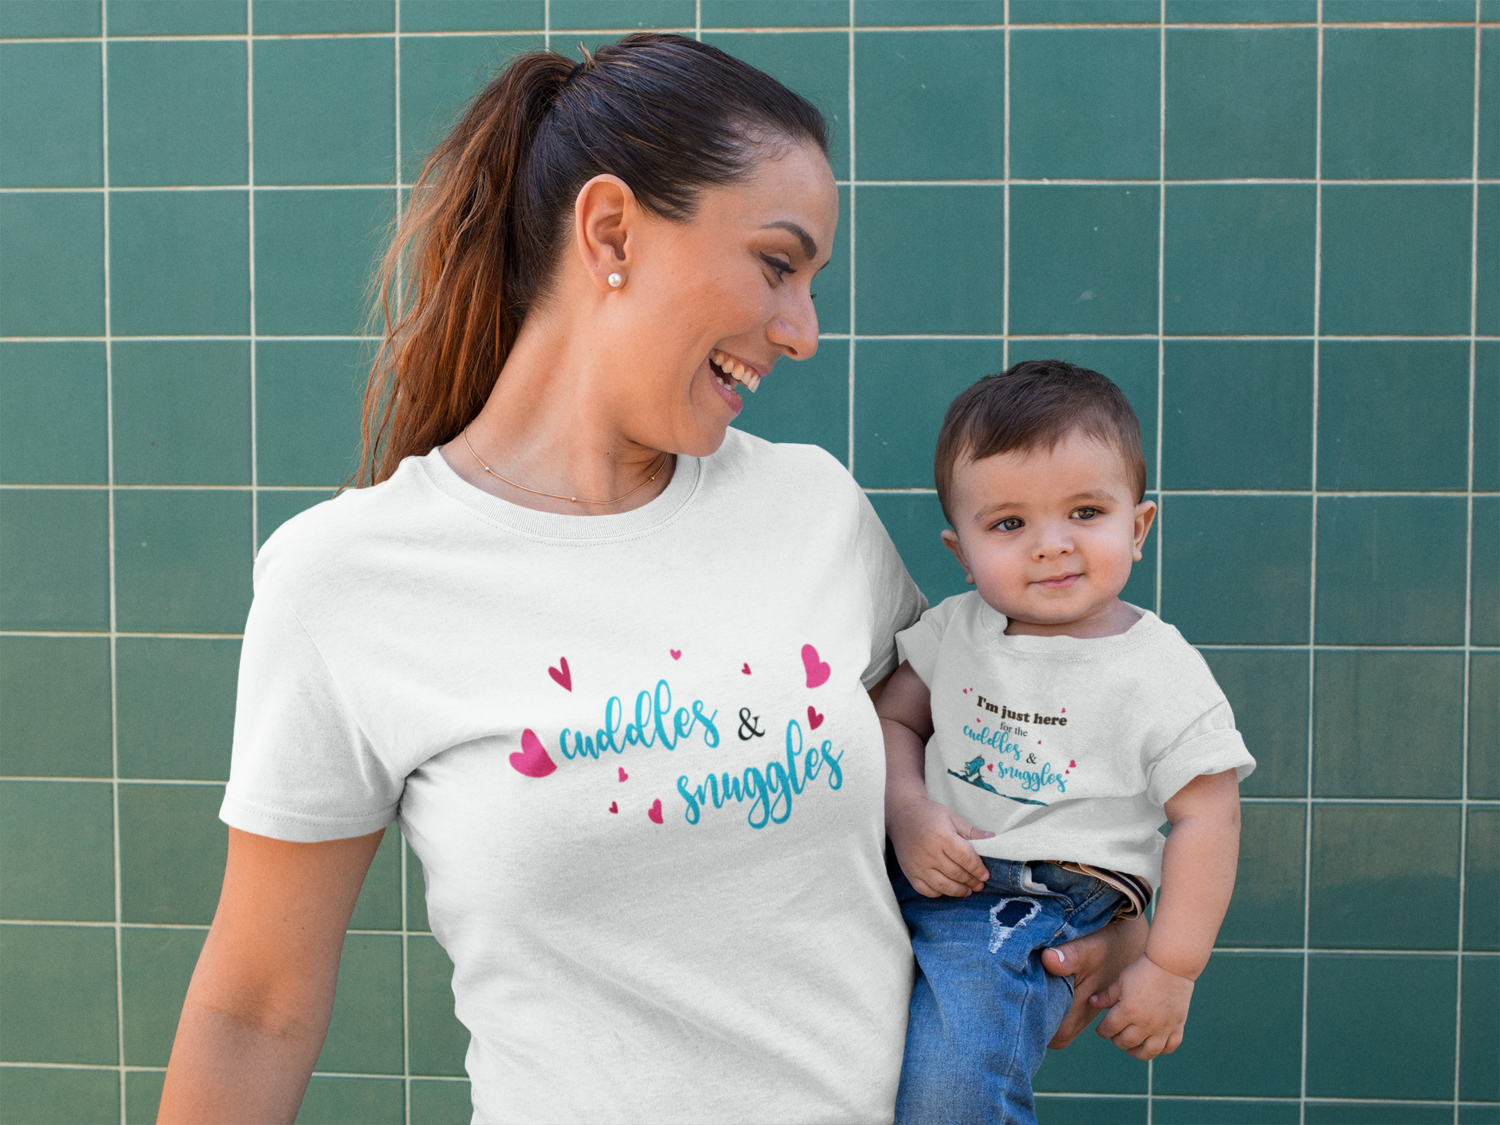 "I'm Just Here for the Cuddles & Snuggles" Baby Jersey Short Sleeve Tee